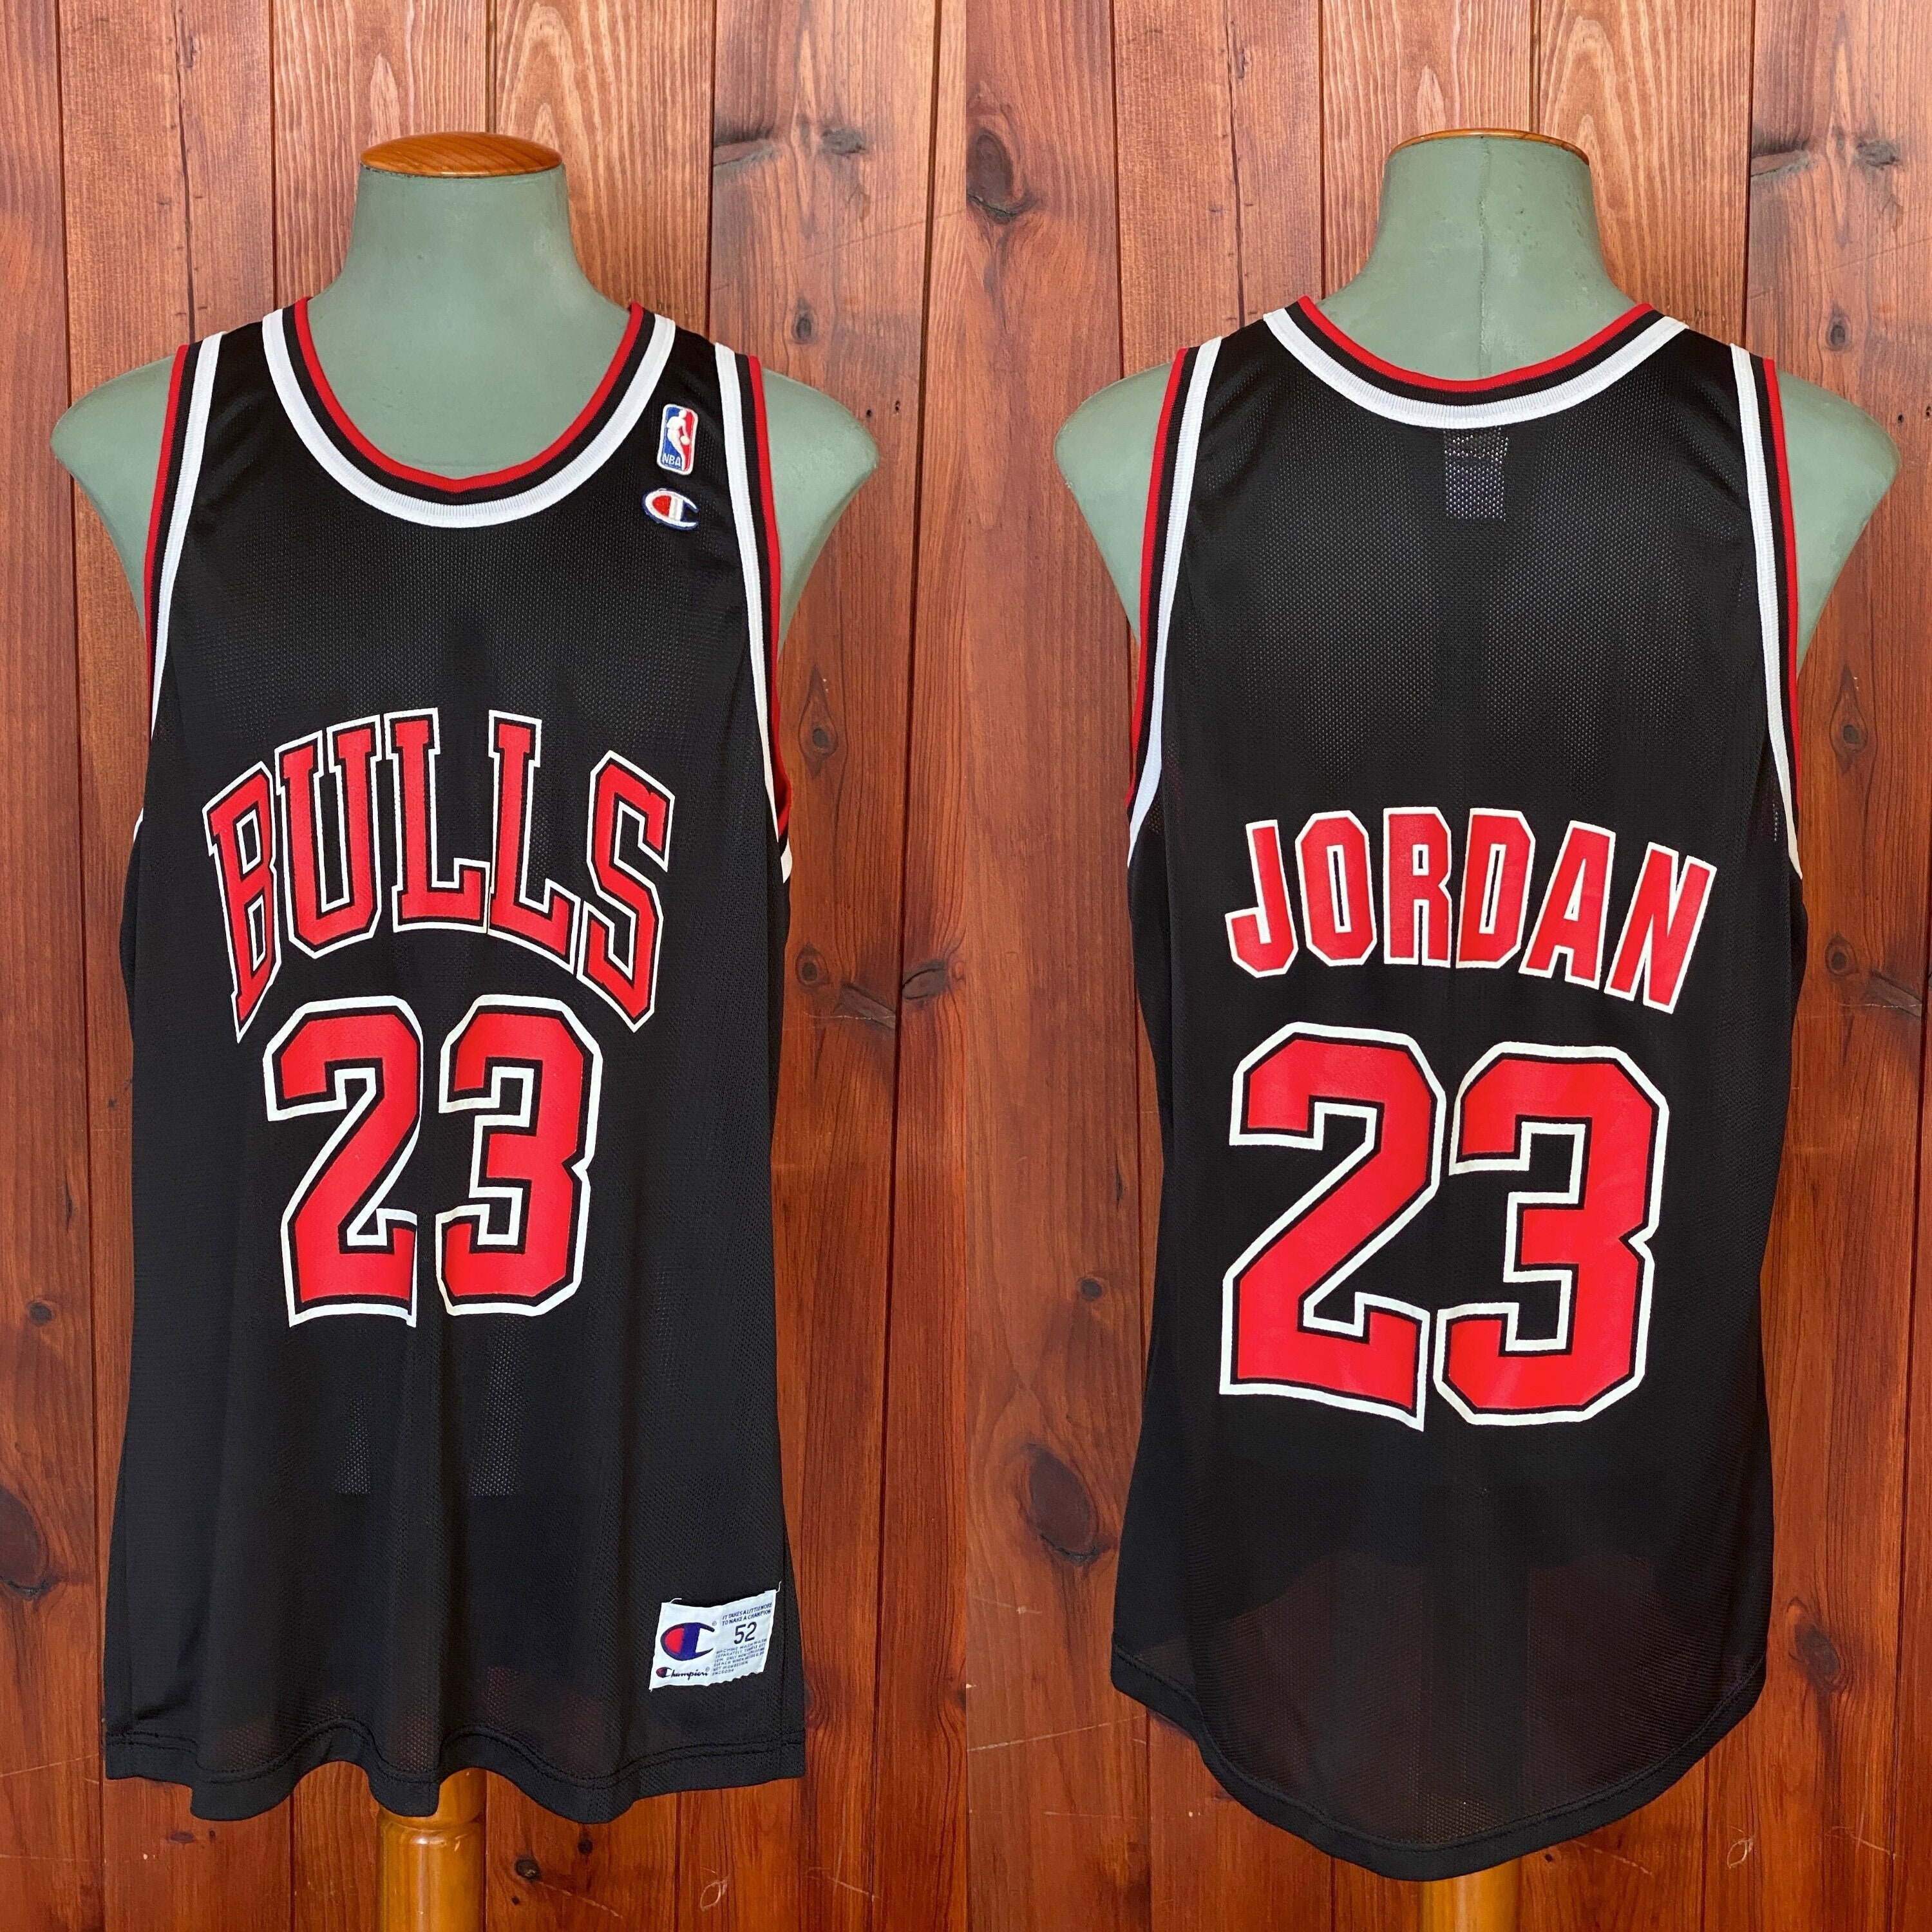 michael jordan jersey Mitchell and Ness -Extremely RARE #12 1990 sz 54  Authentic